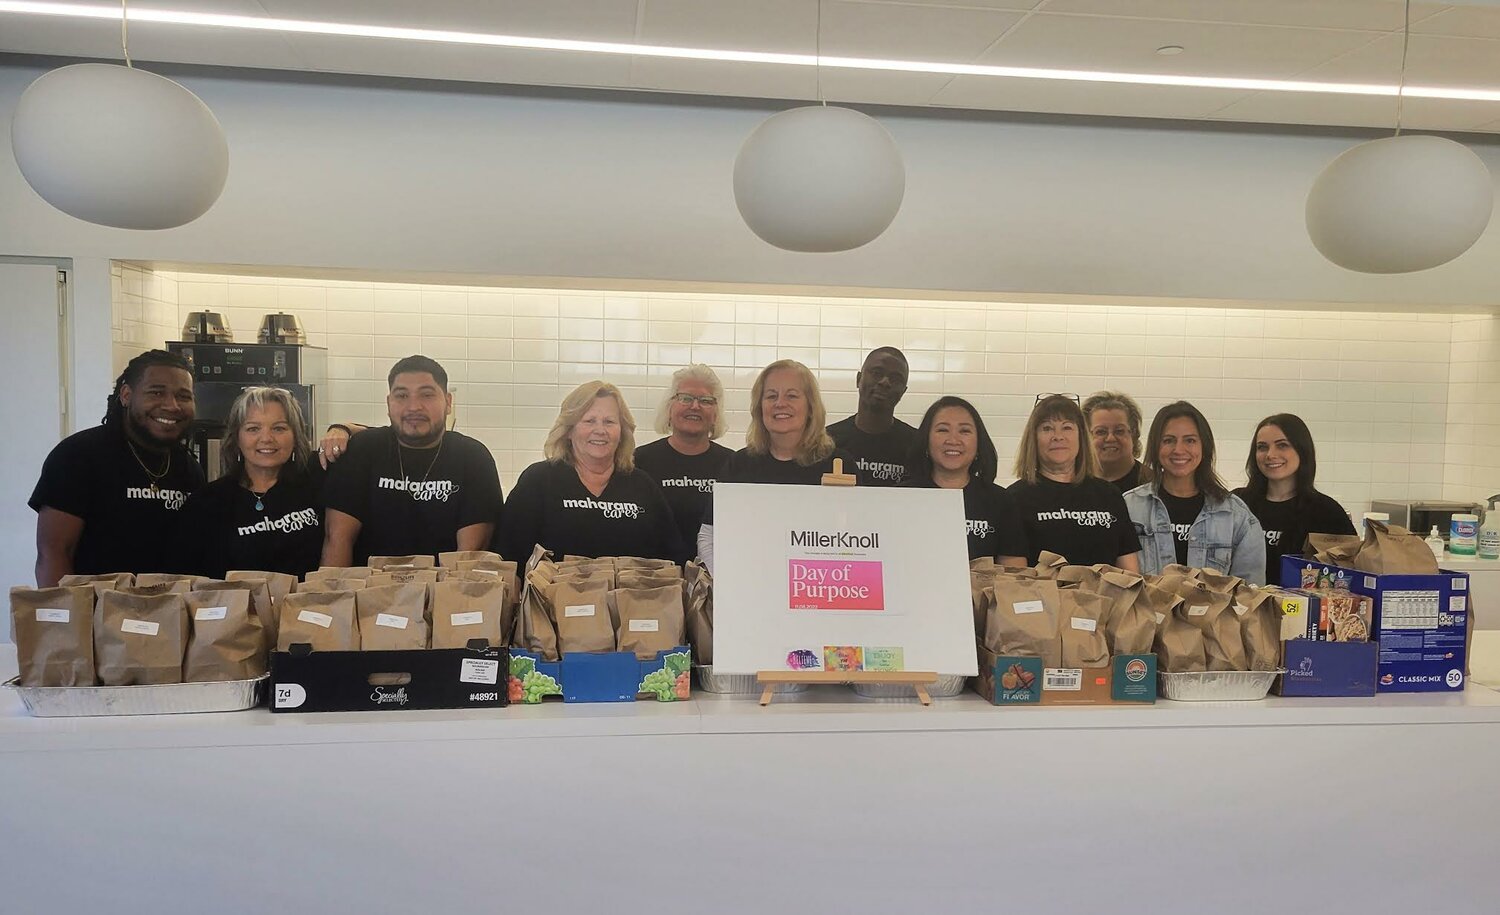 Employees at Maharam in Yaphank with bag lunches they assembled for the soup kitchen at St. Joseph the Worker Church in East Patchogue.